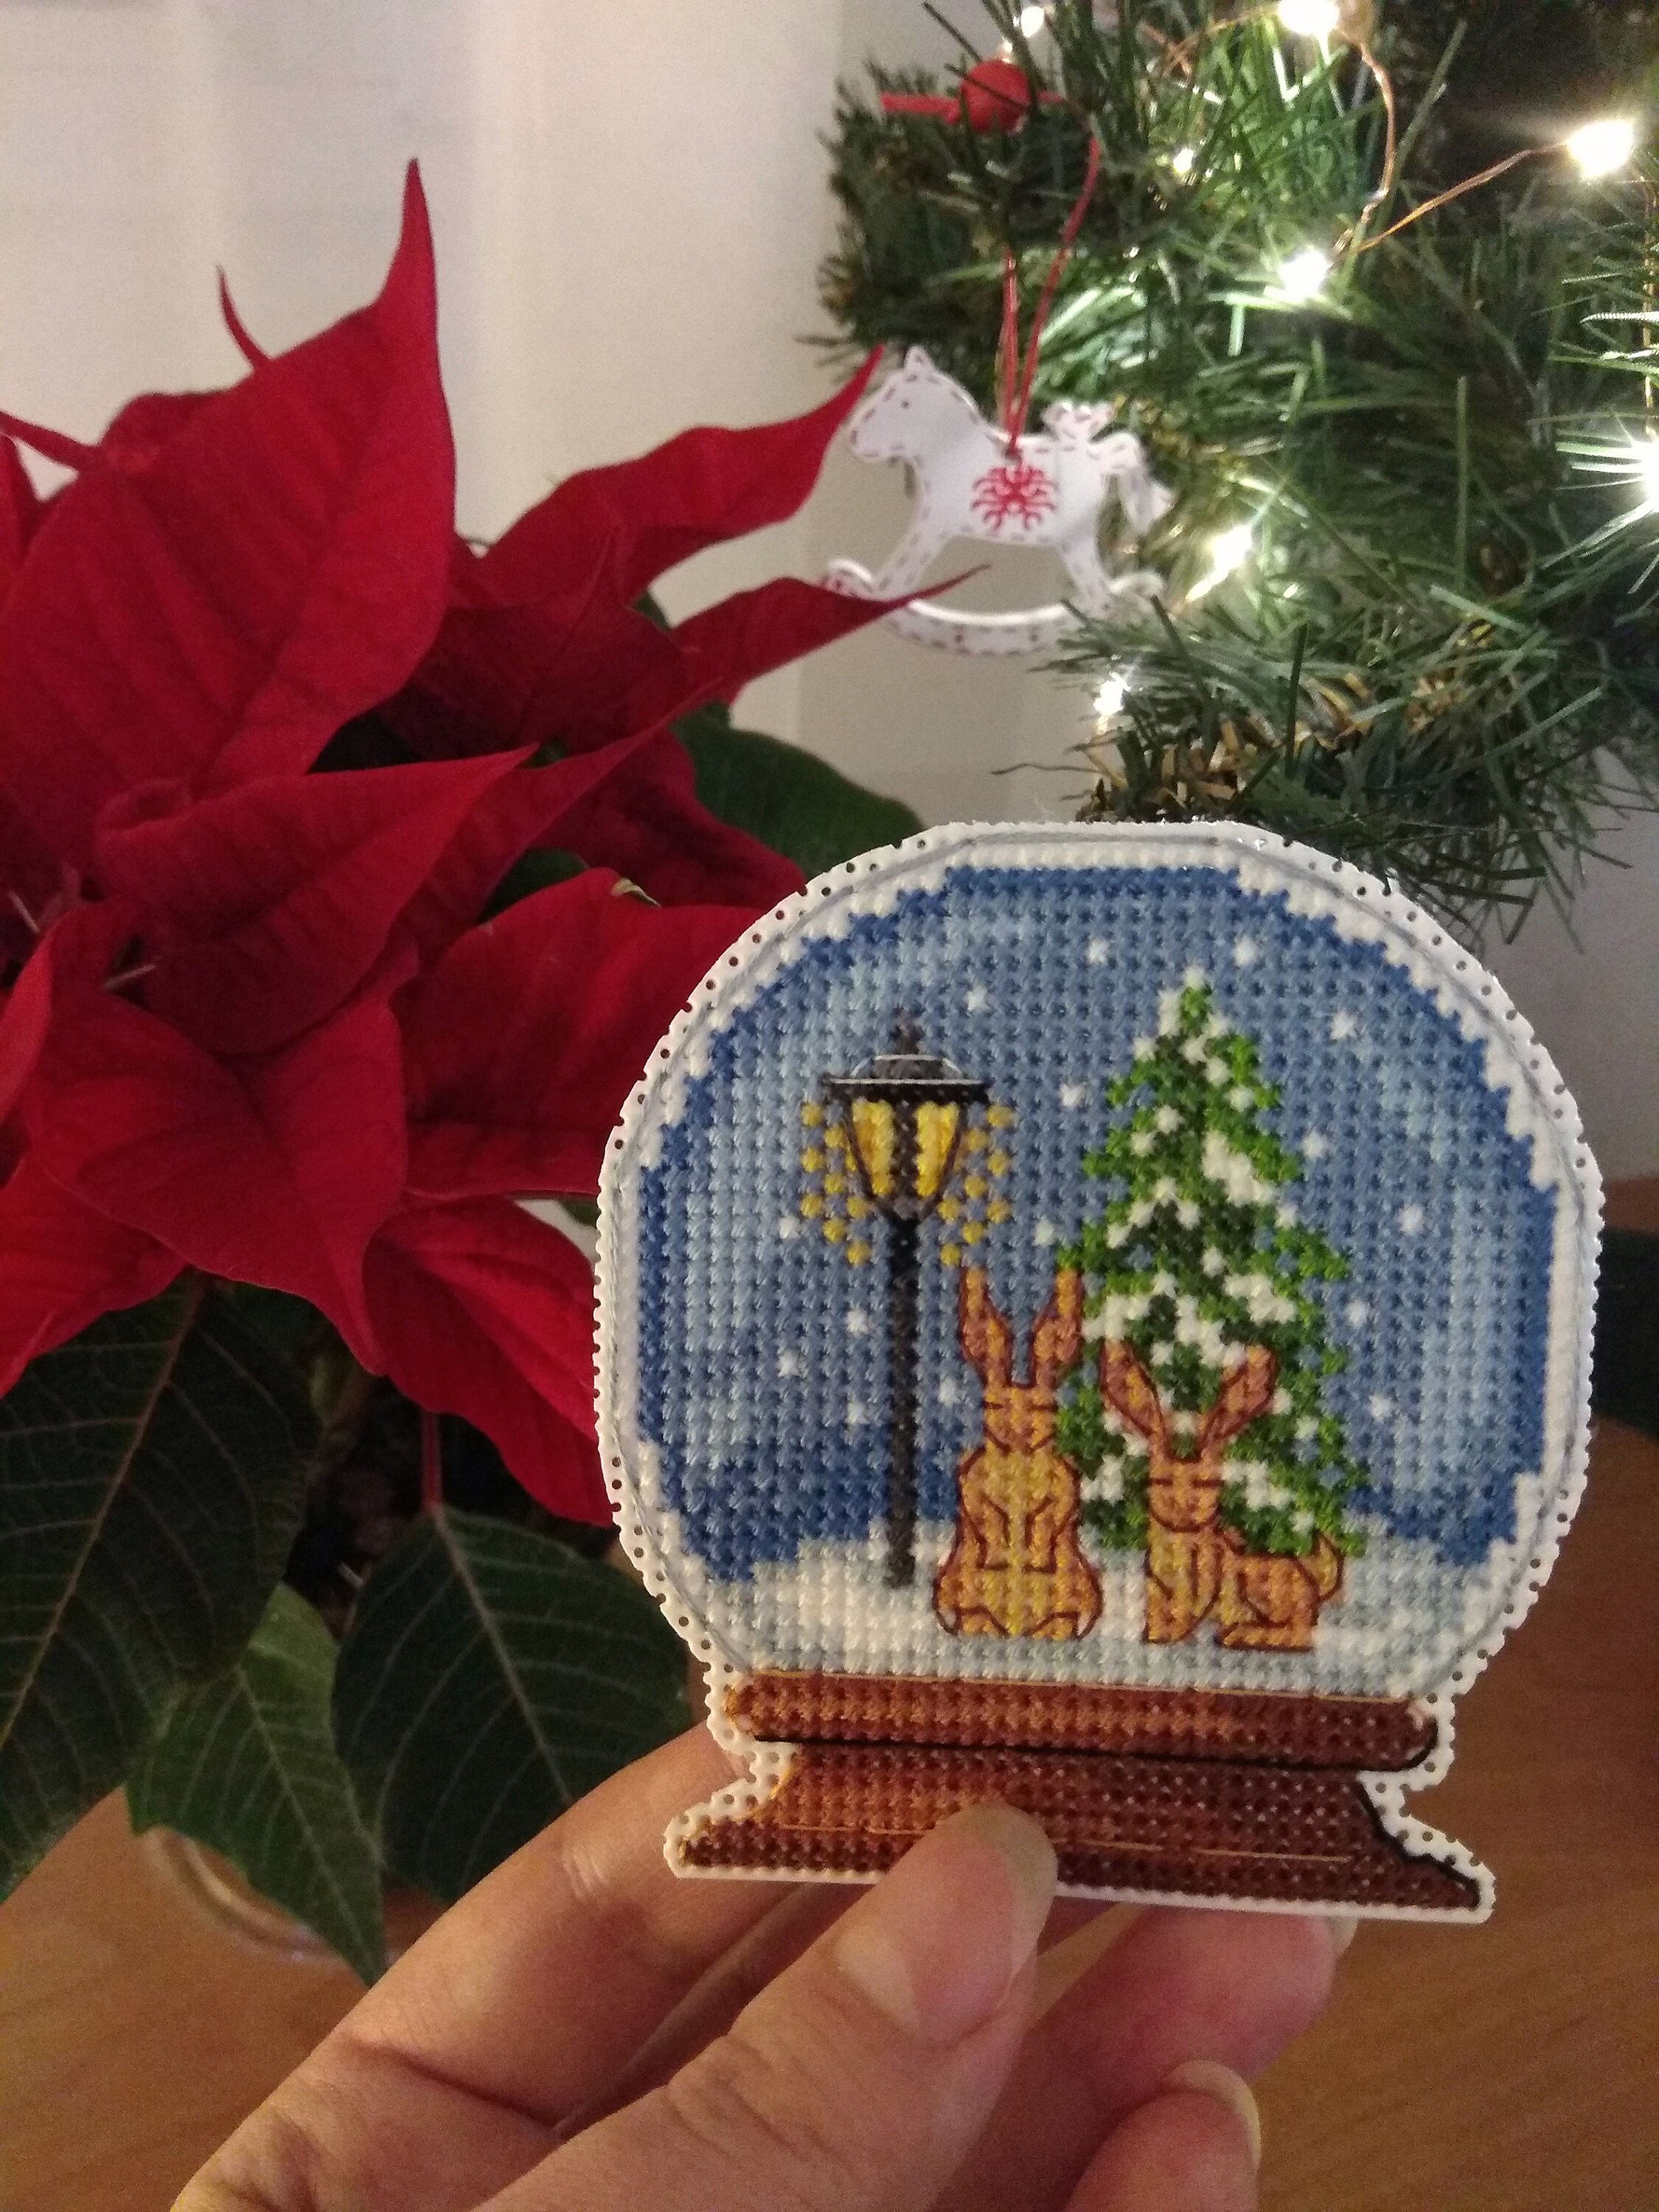 Unfinshed Wood Snow Globe Cross Stitch Display - Paisleys and